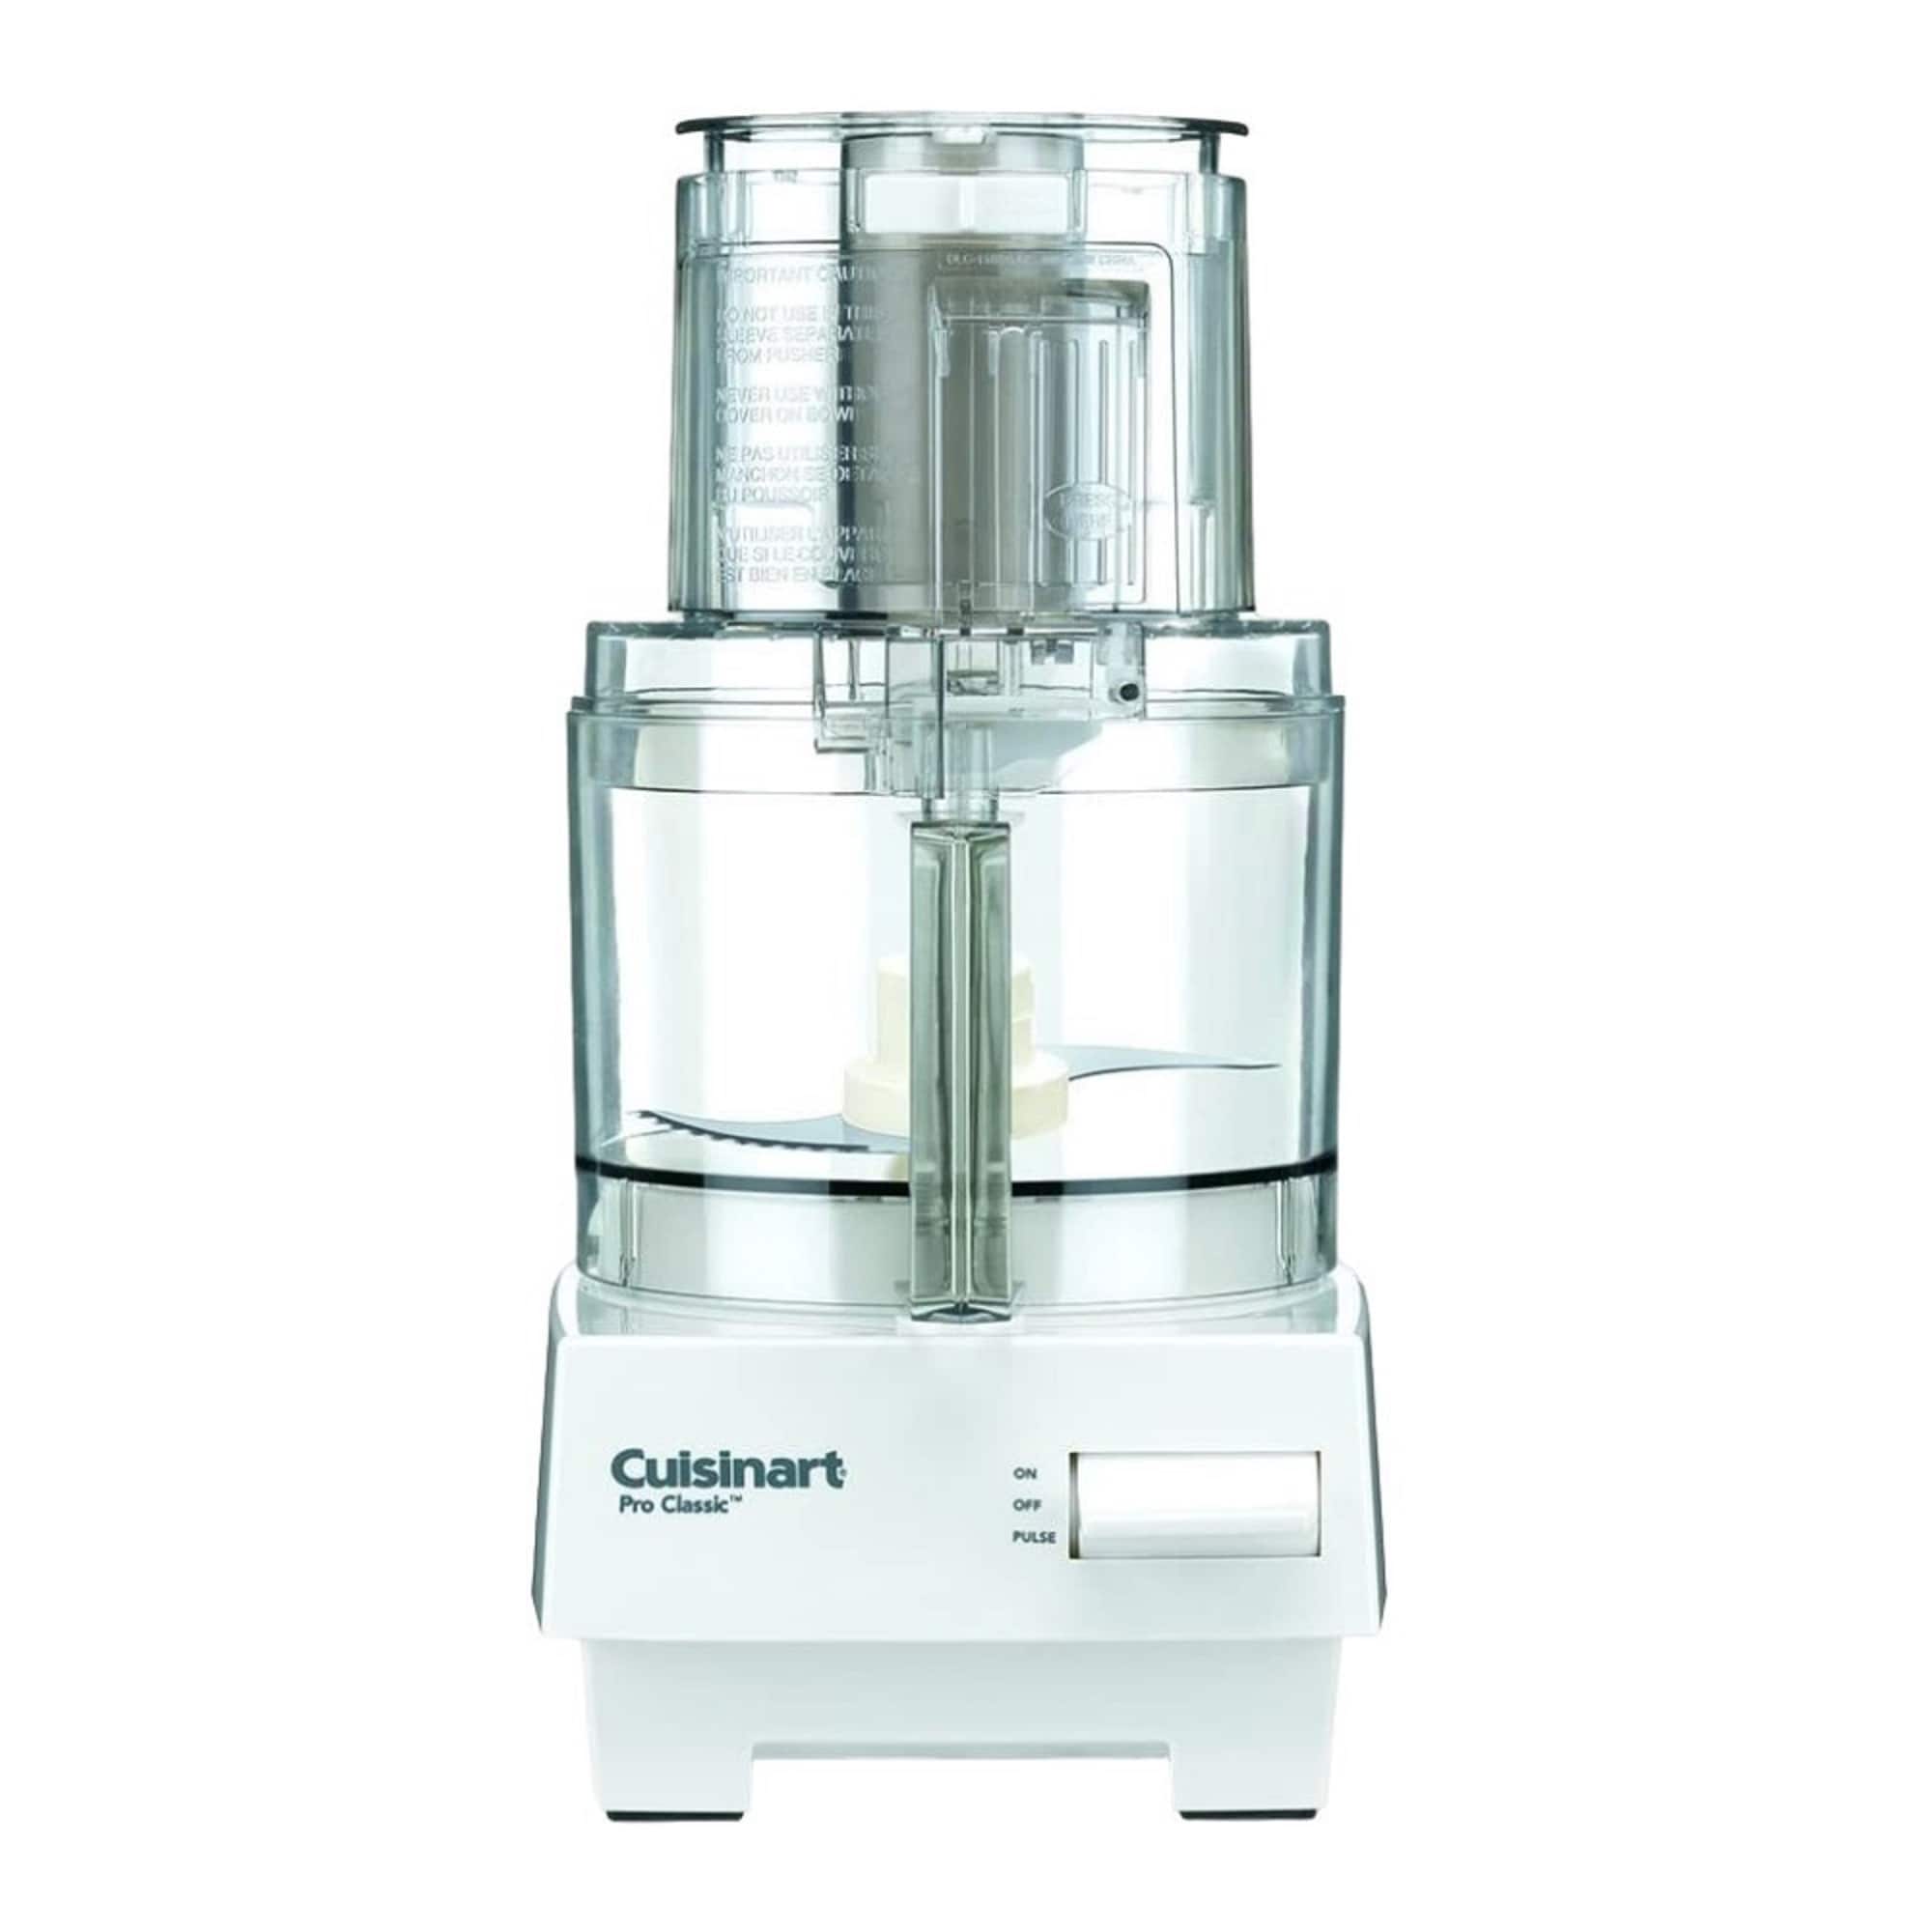 Custom 14-Cup Food Processor + Extra Thick Slicing Disk (White), Cuisinart